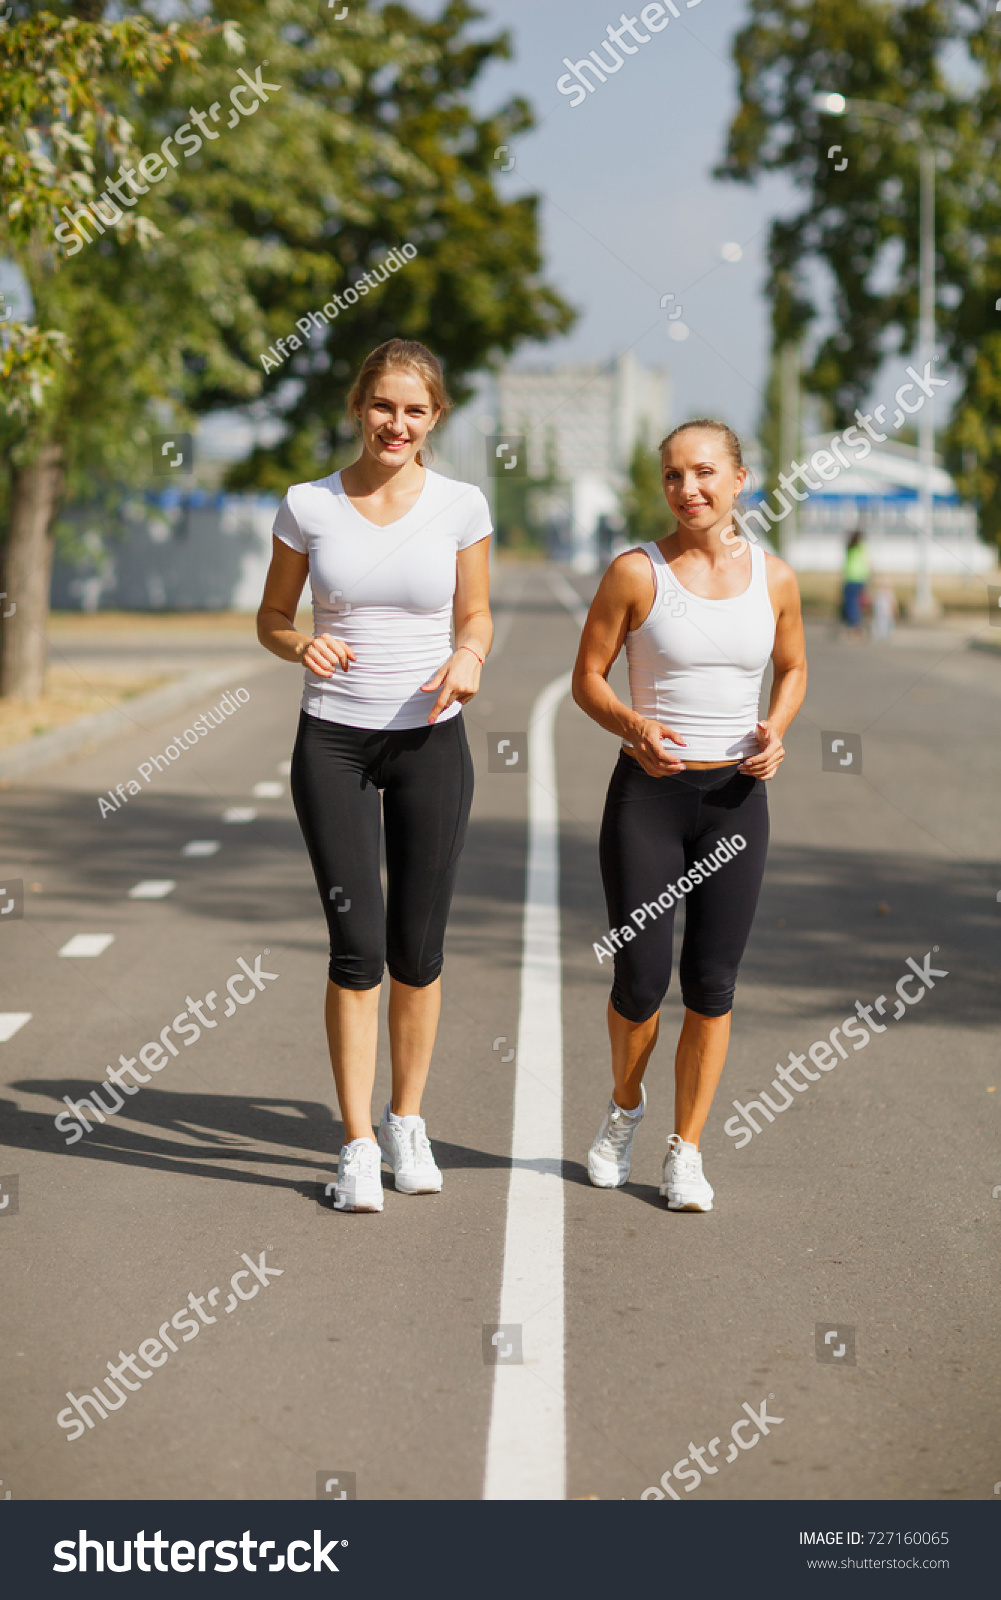 Attractive Smiling Girls Runners On 